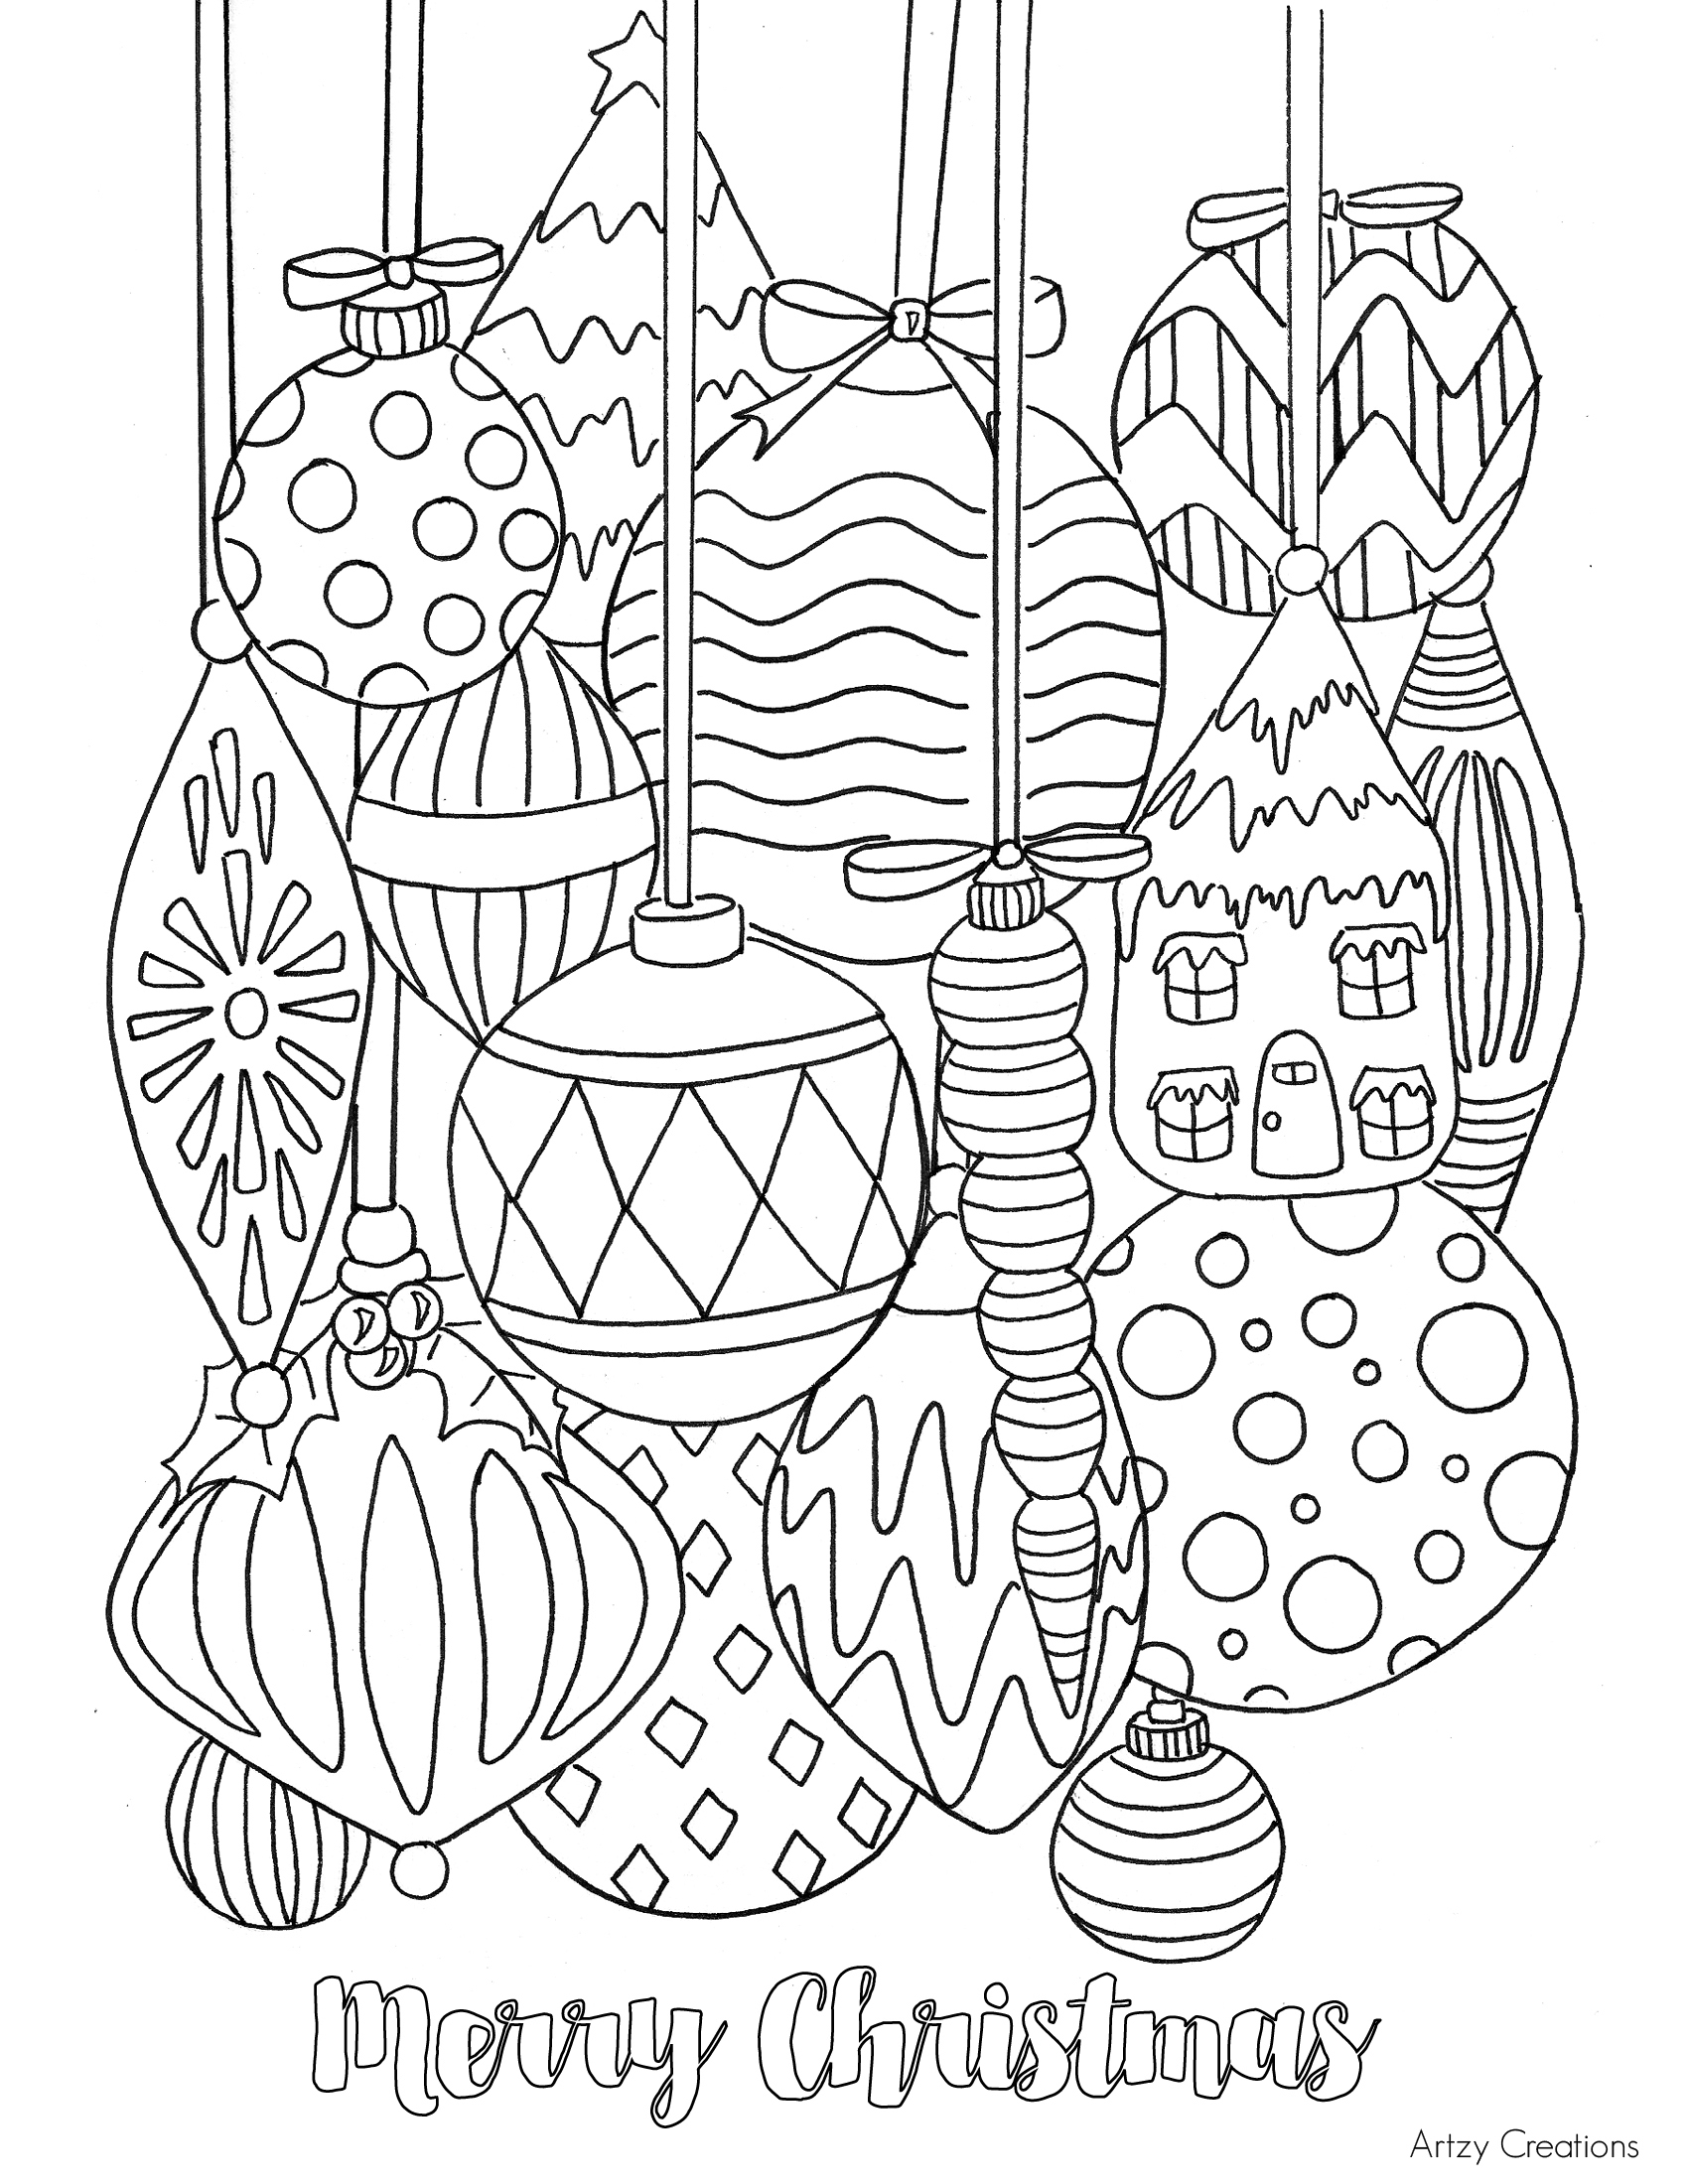 Coloring Pages : Free Christmas Ornament Coloringage Tgif This - Free Printable Christmas Ornament Coloring Pages